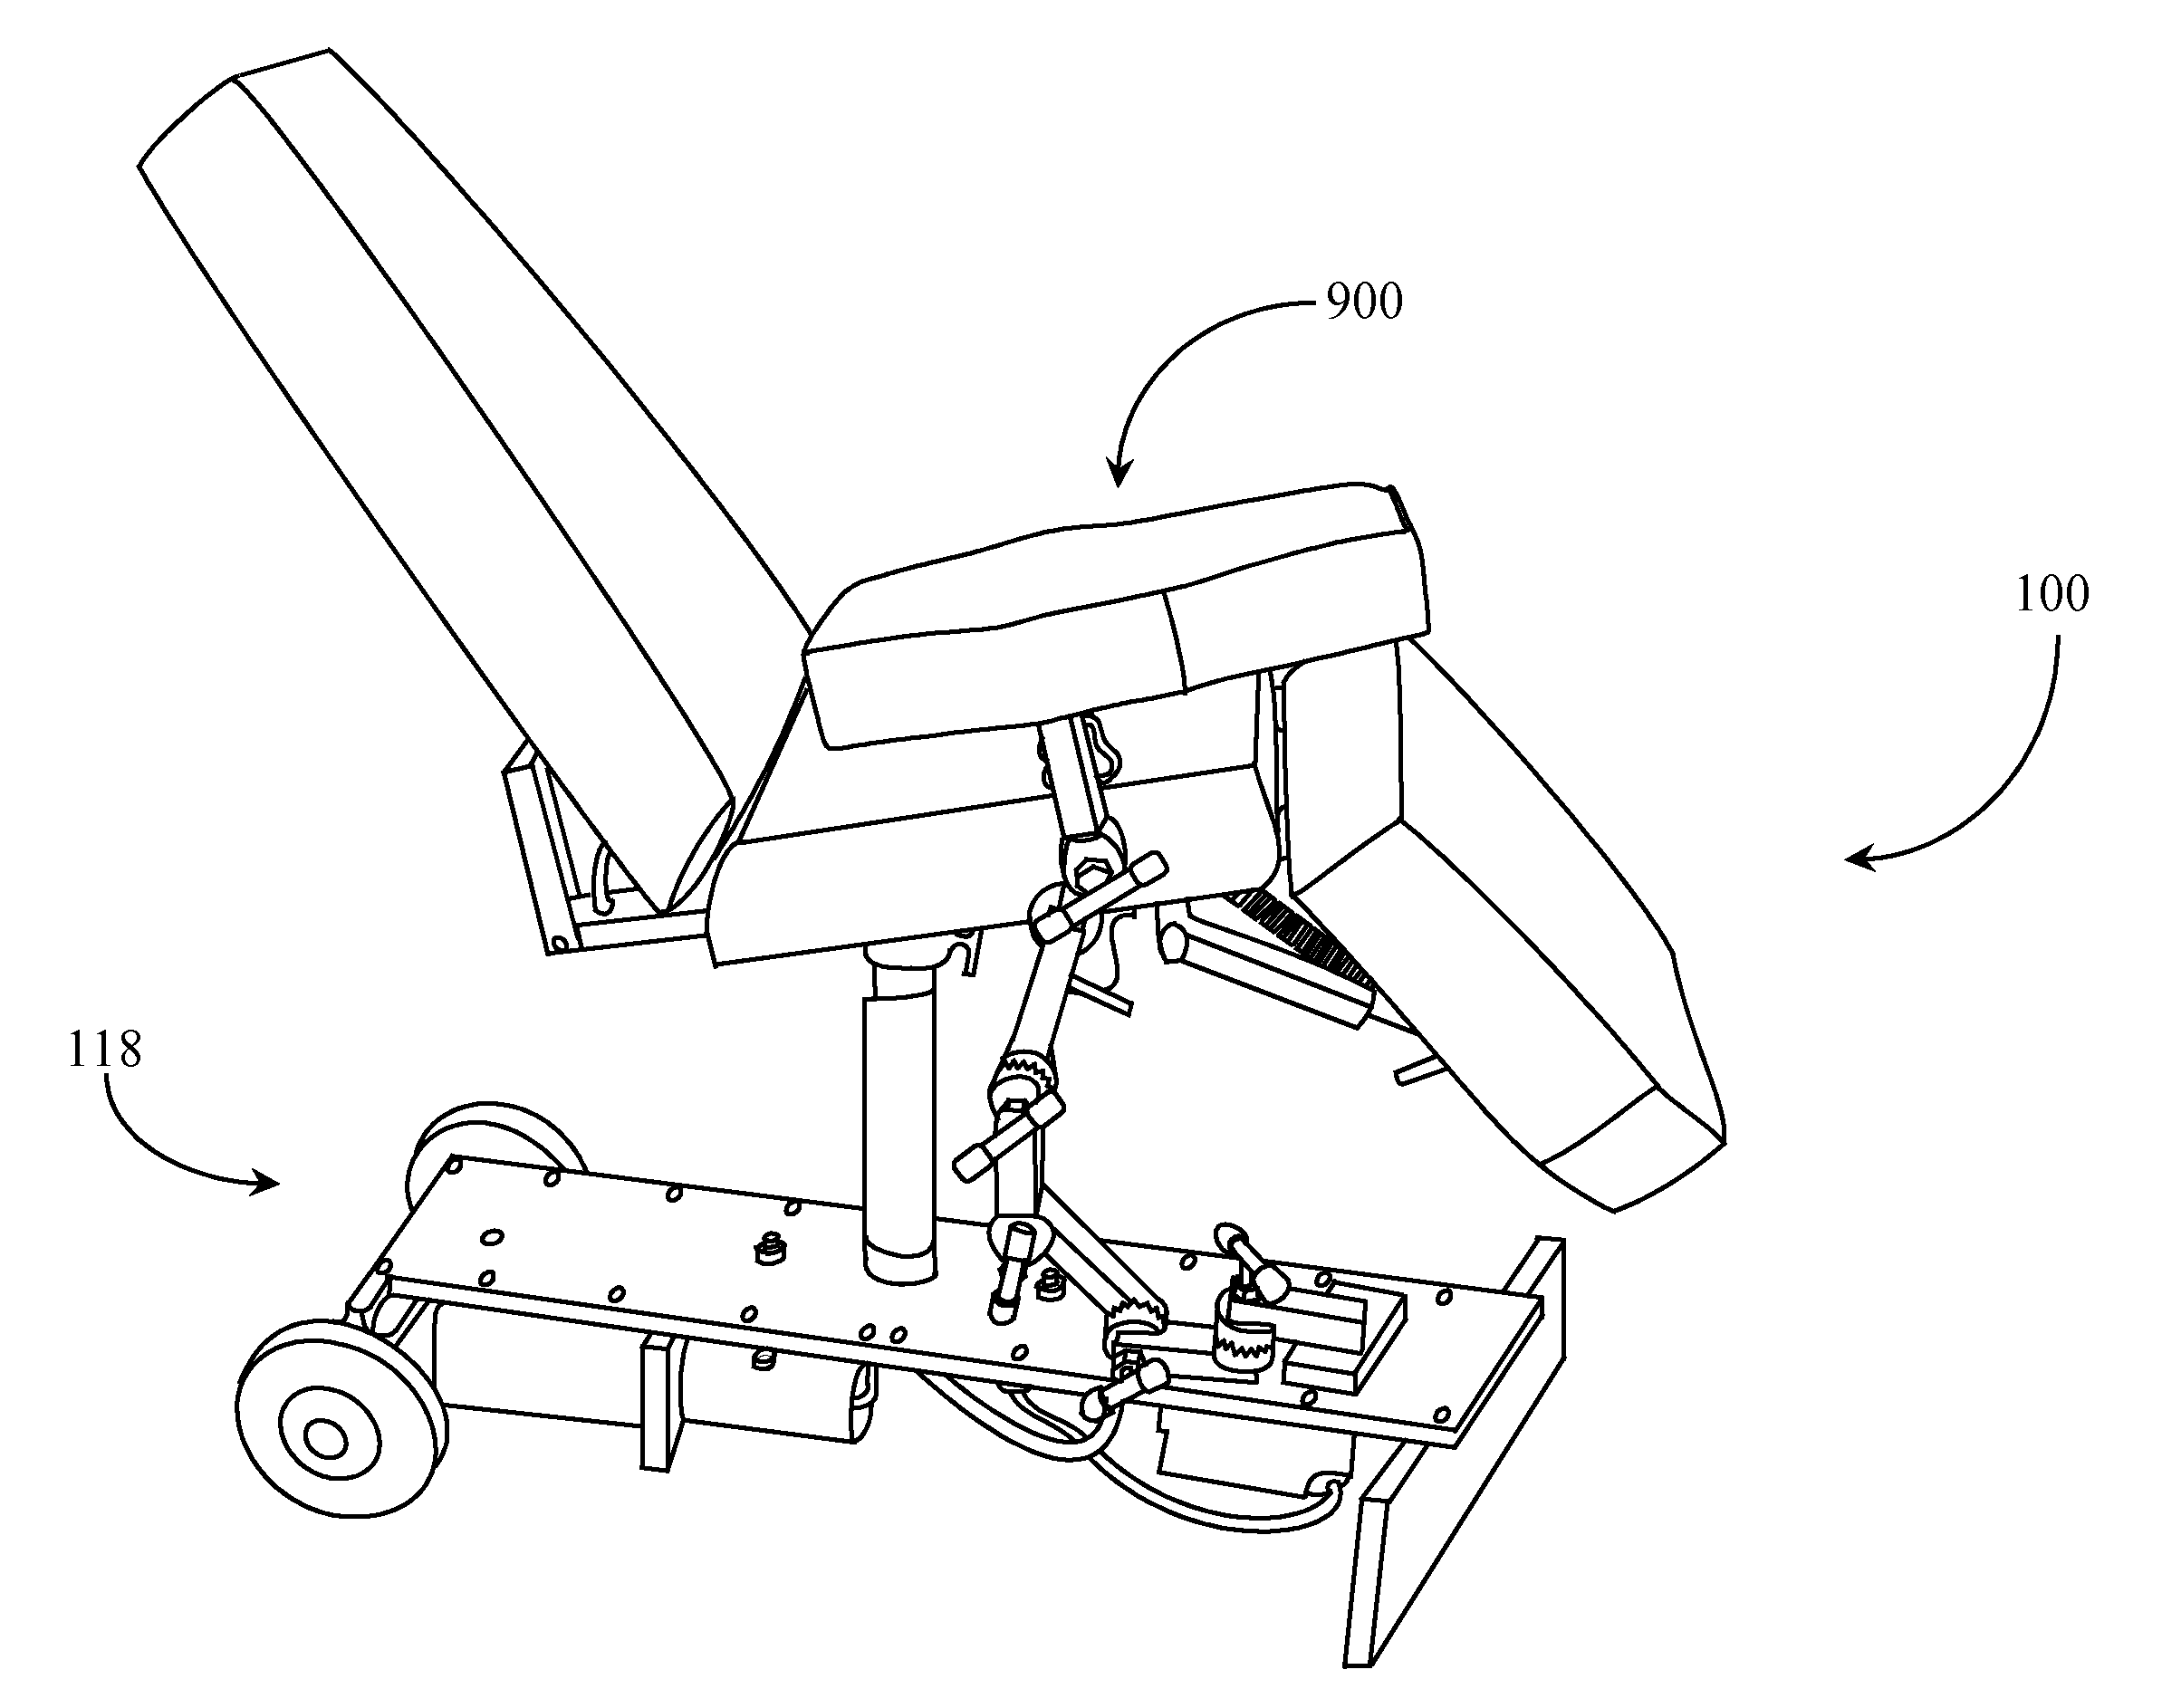 Hydraulic Chair with Positioning Apparatus